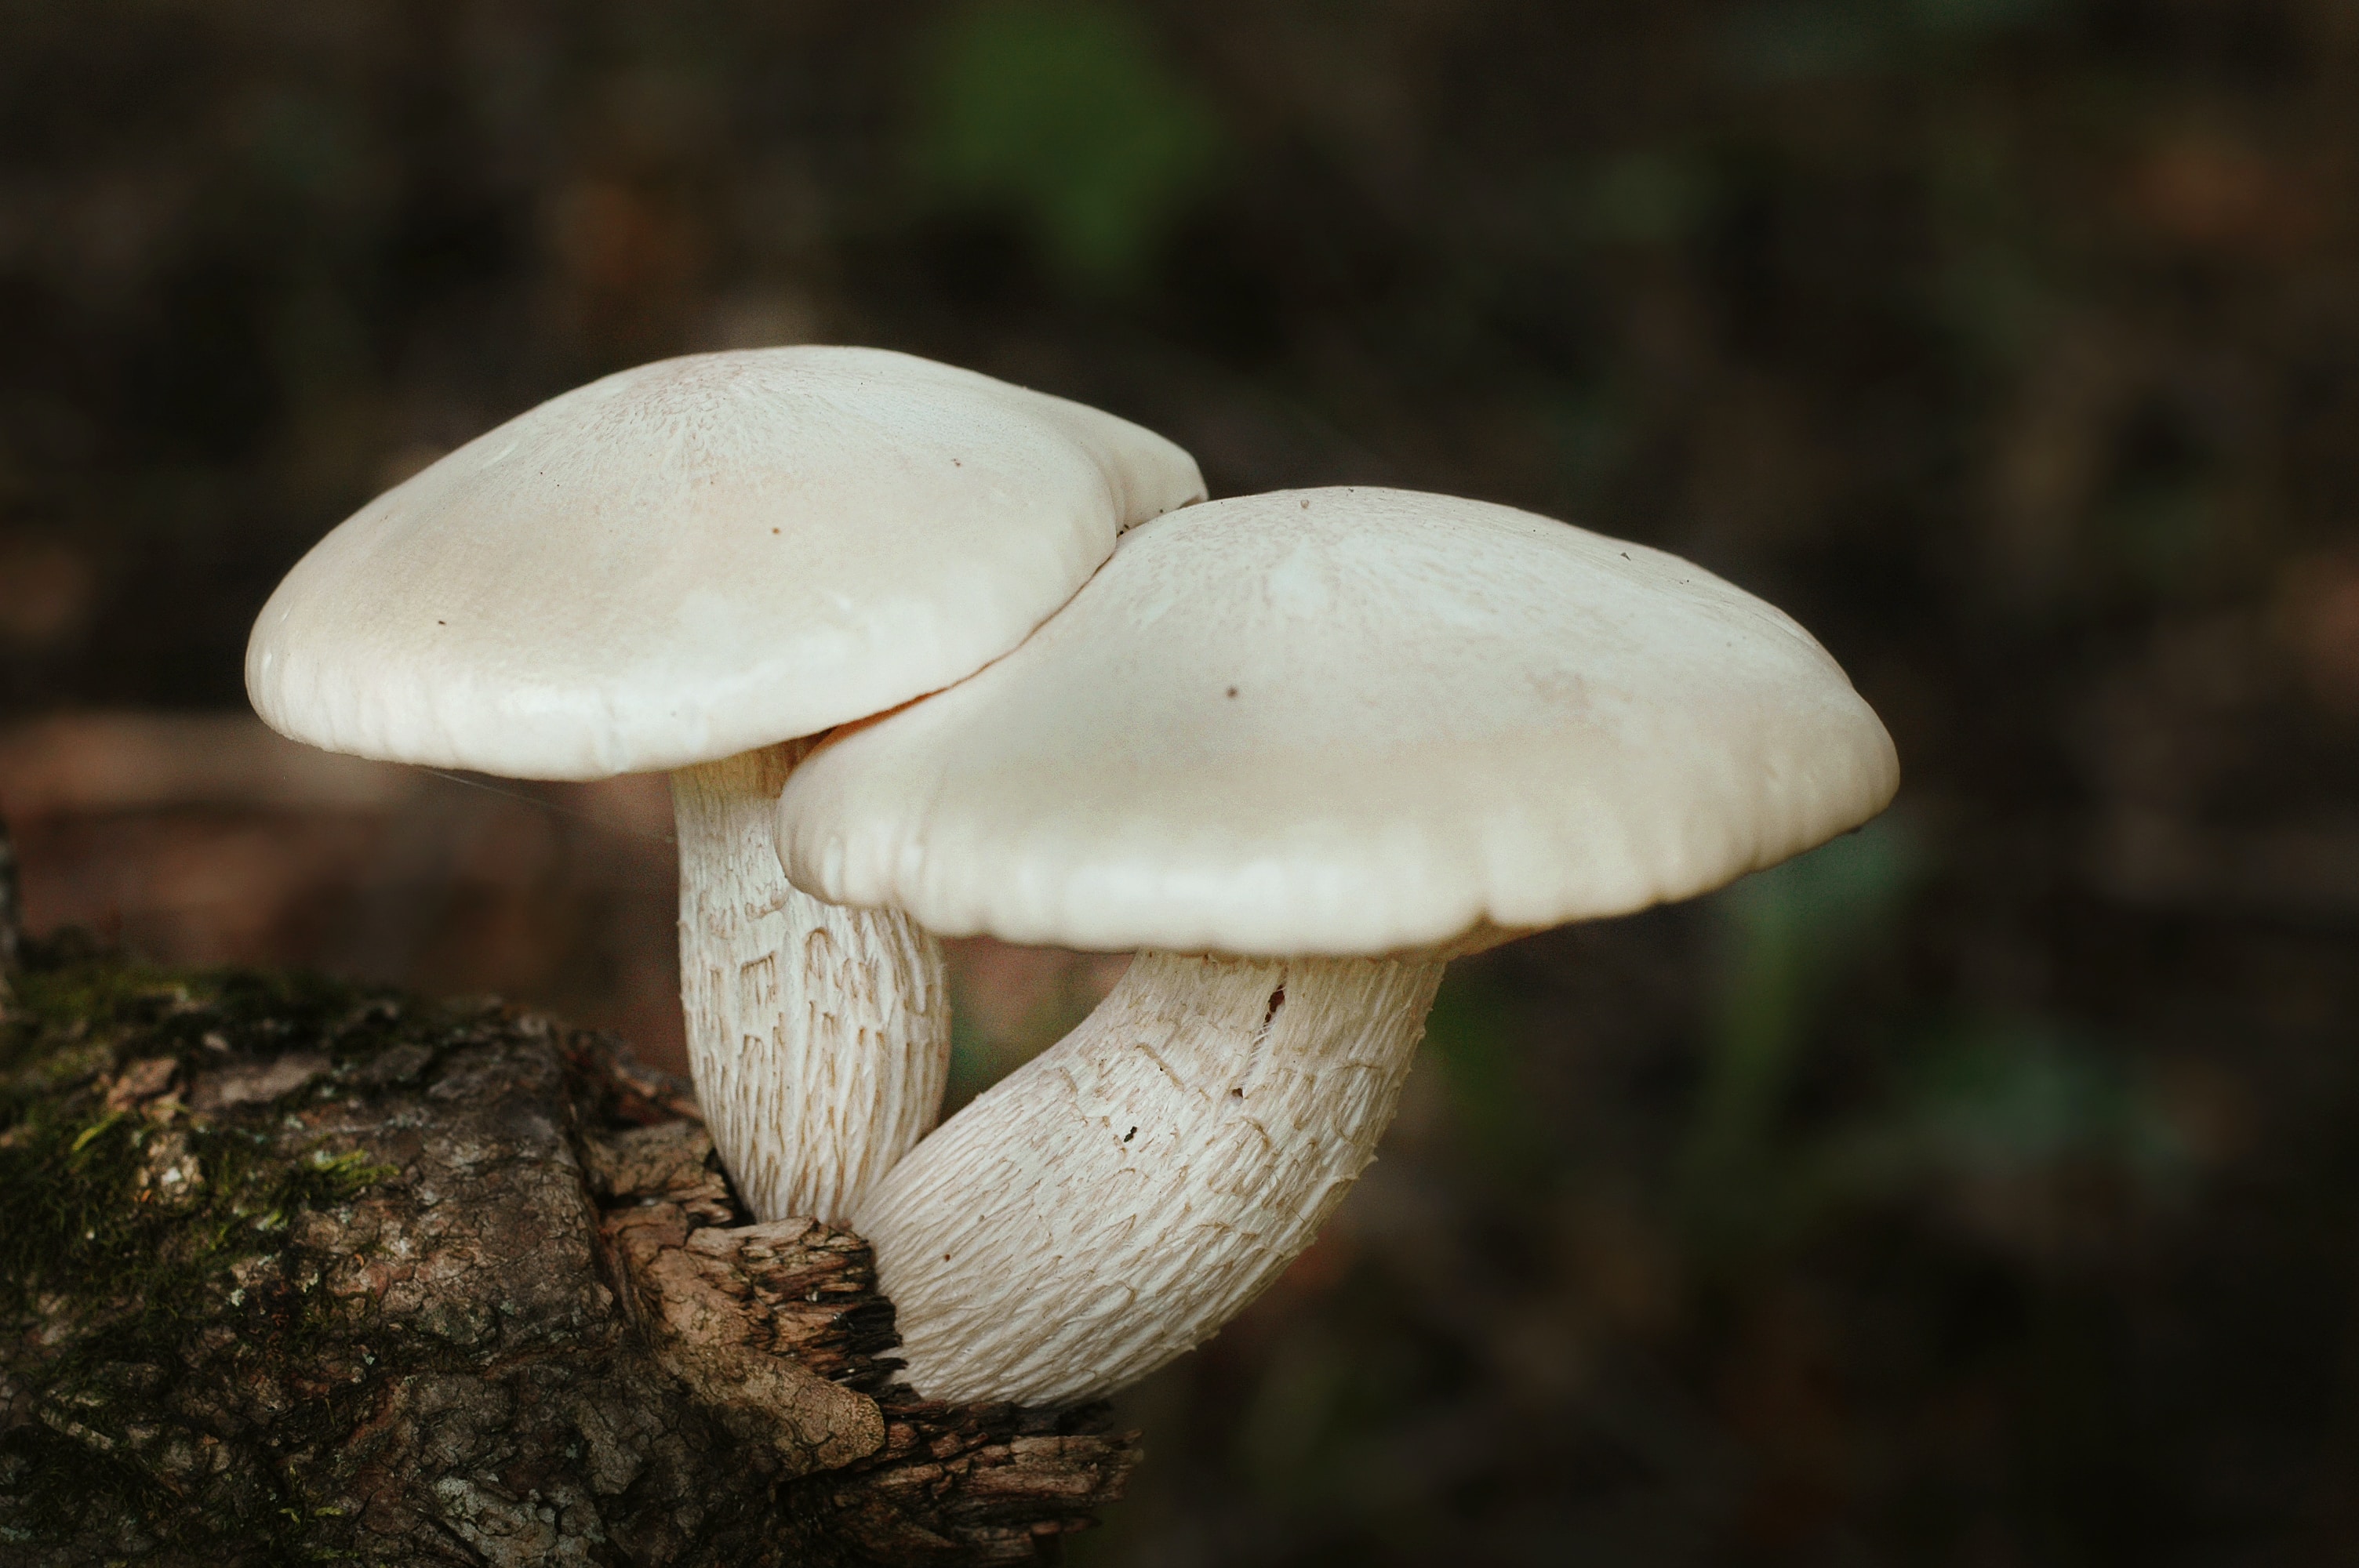 Mushroom supplements for athletic performance